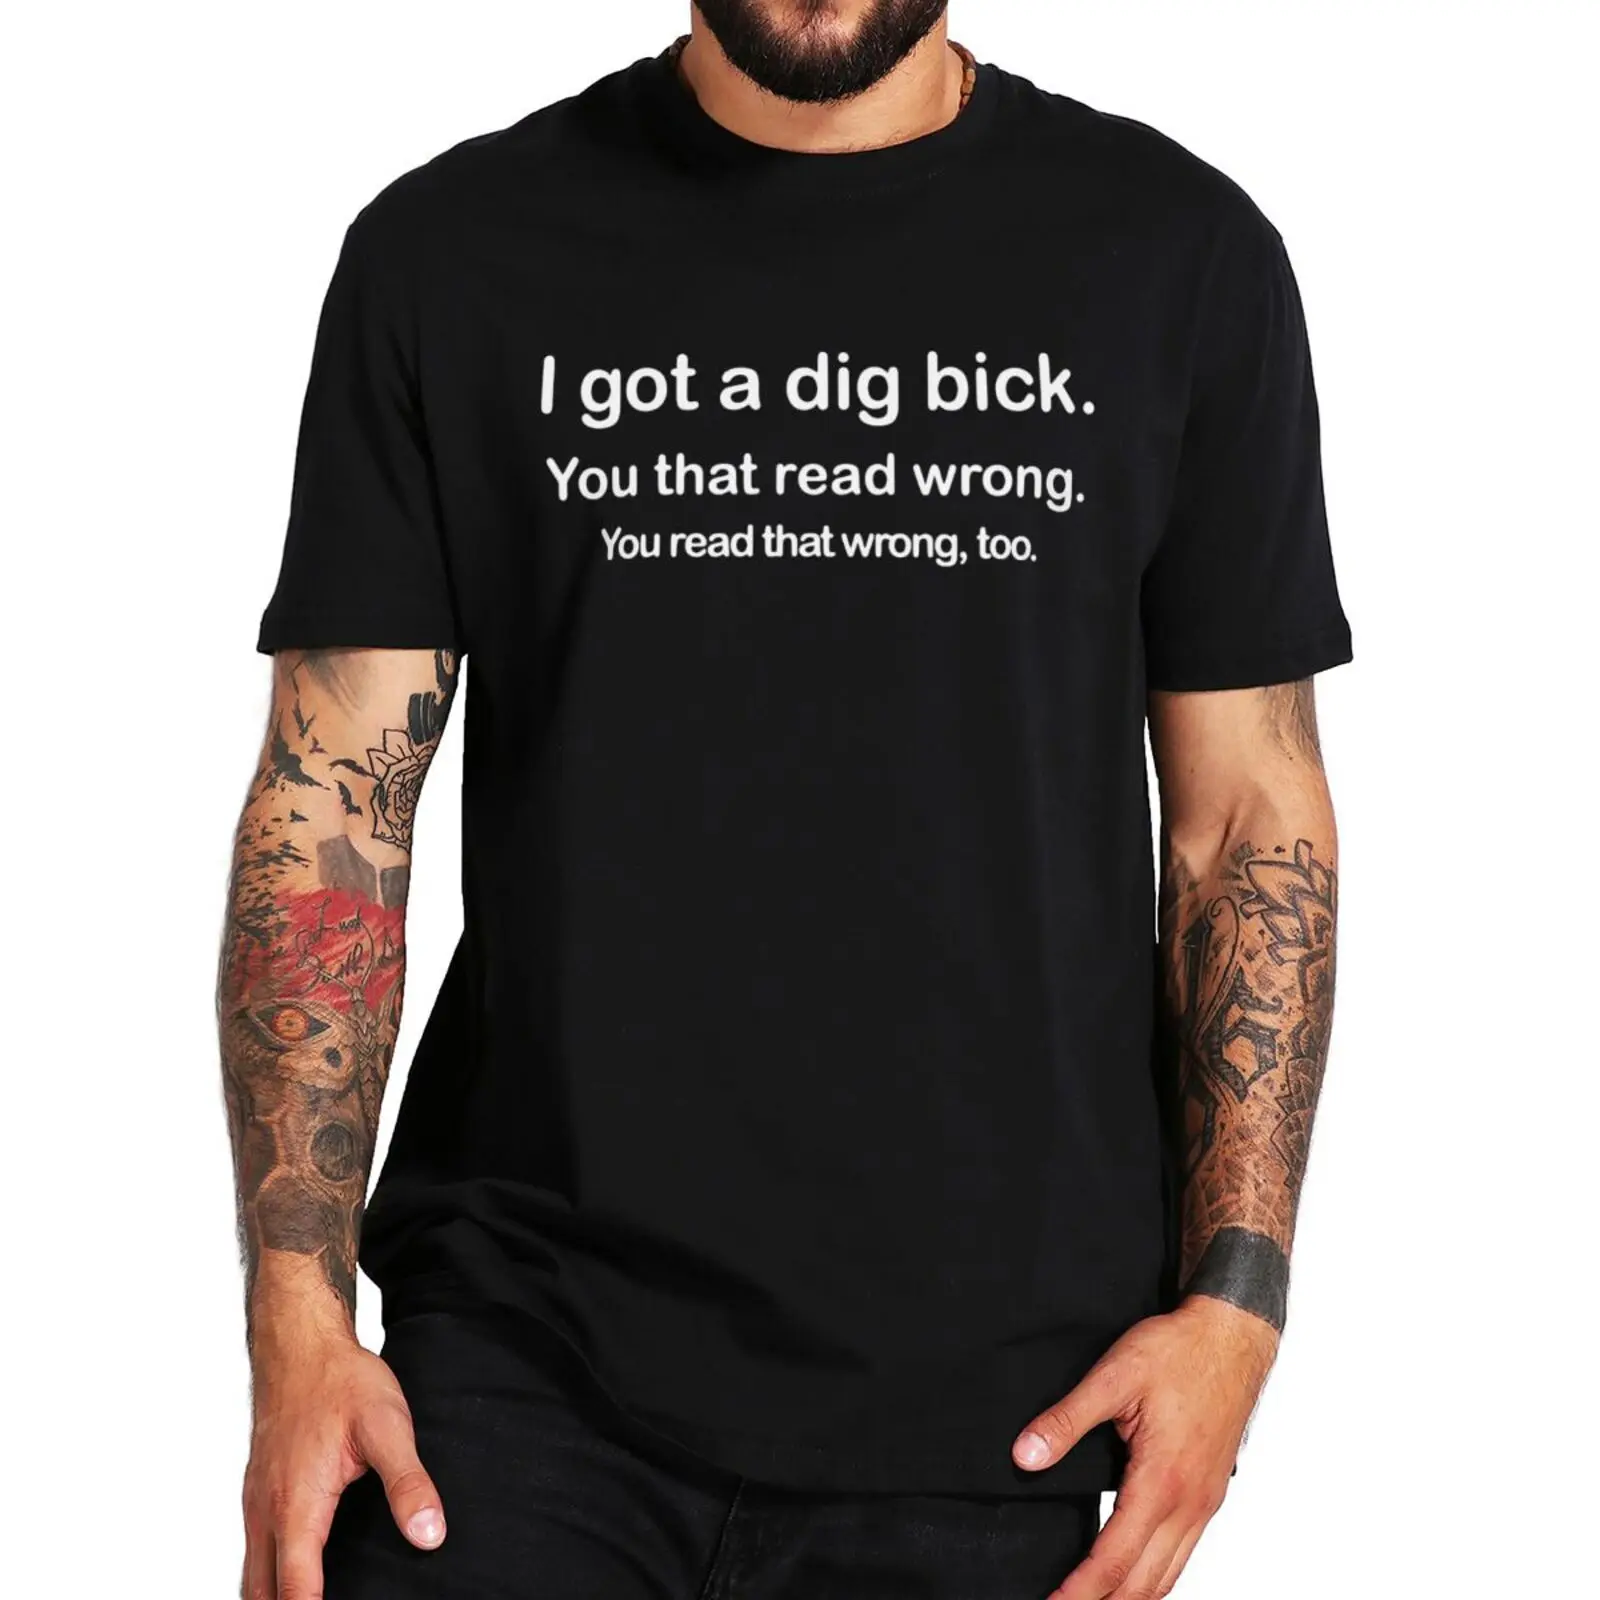 

I Have A Dig Bick You Read That Wrong T Shirt Funny Adult Humor Jokes Tops 100% Cotton Unisex Casual T-shirts EU Size